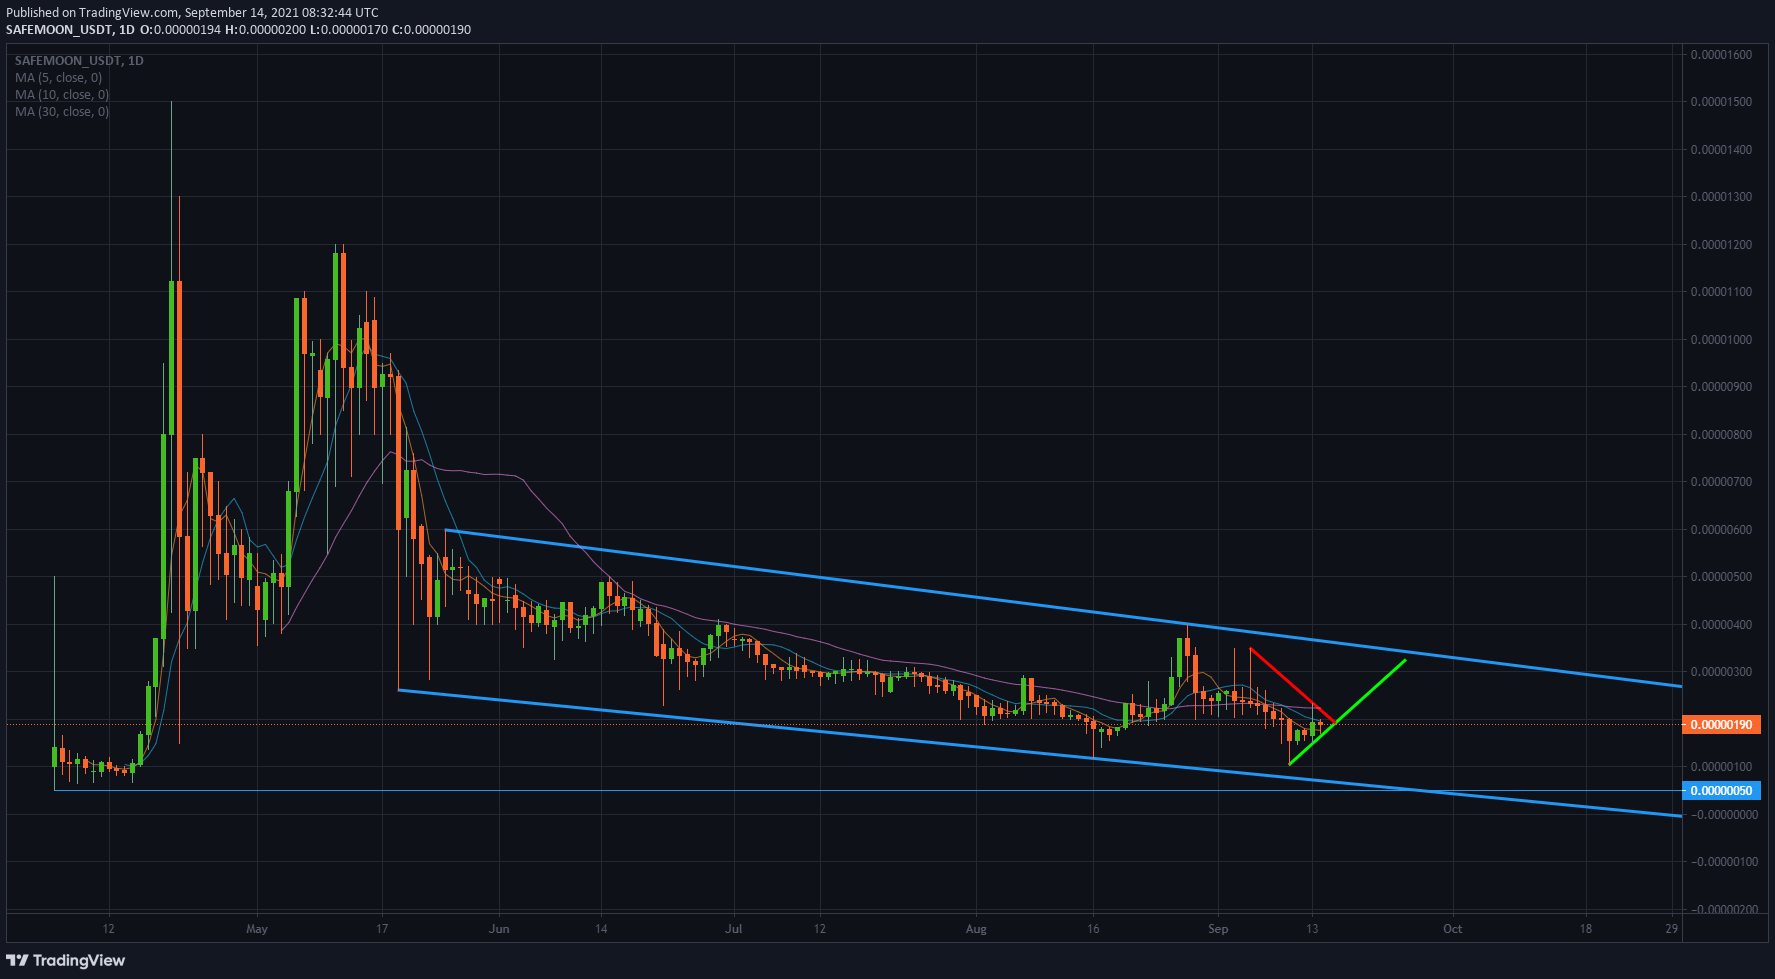 SAFEMOON/USD daily chart